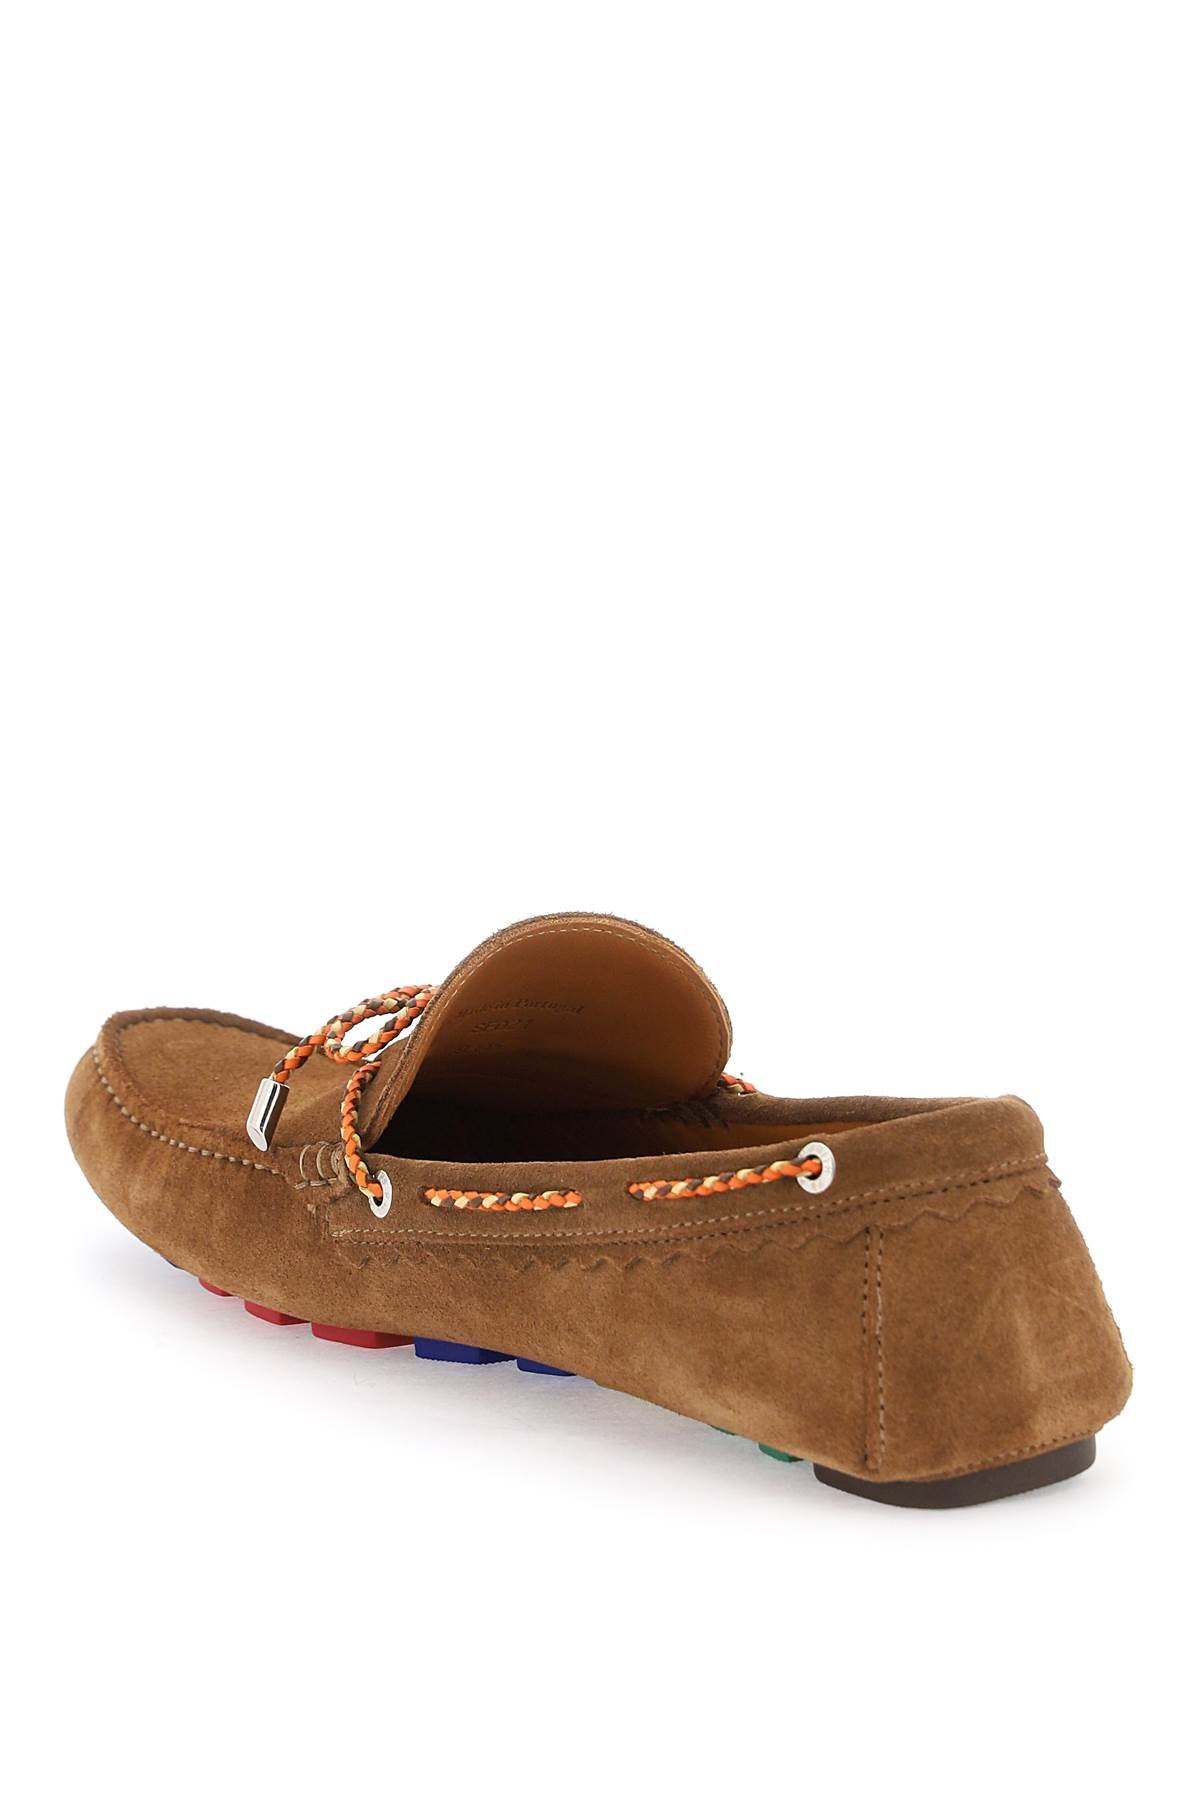 PS Paul Smith Ps paul smith springfield suede loafers